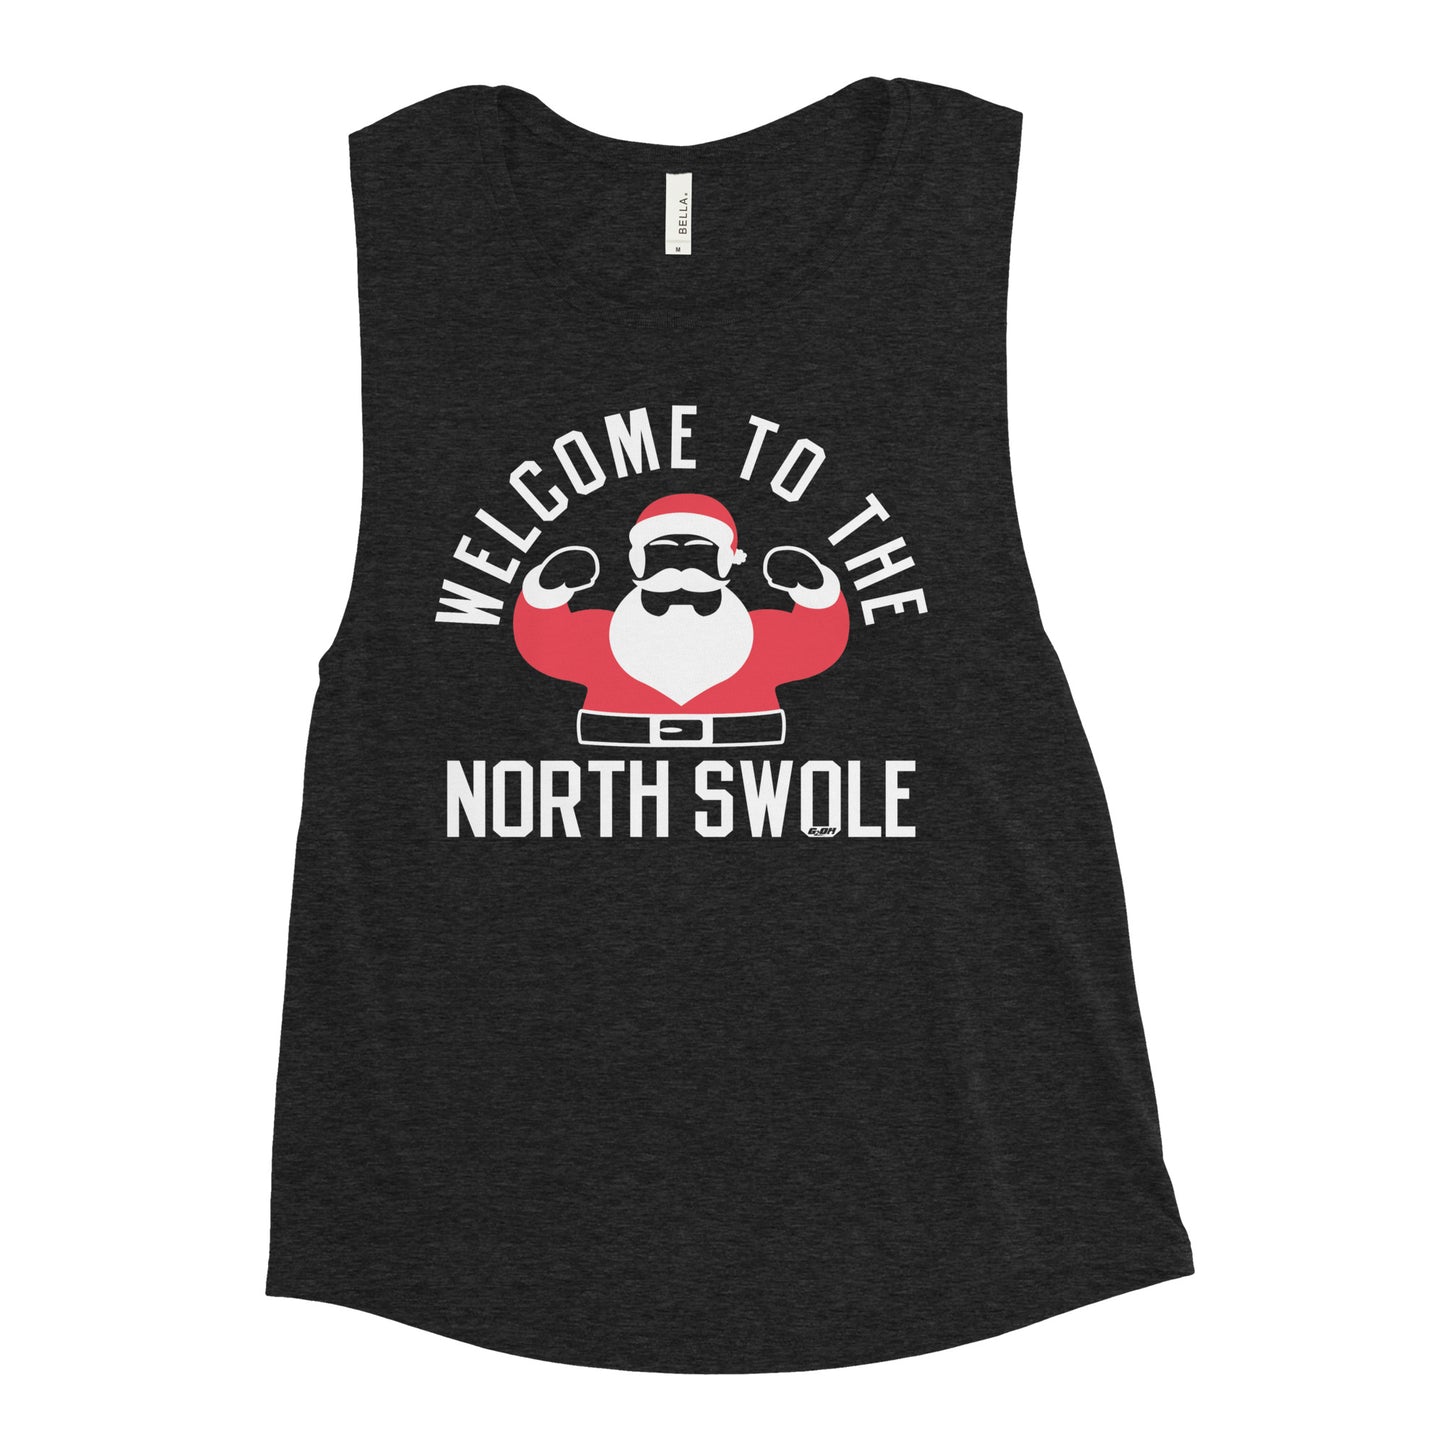 The North Swole Women's Muscle Tank